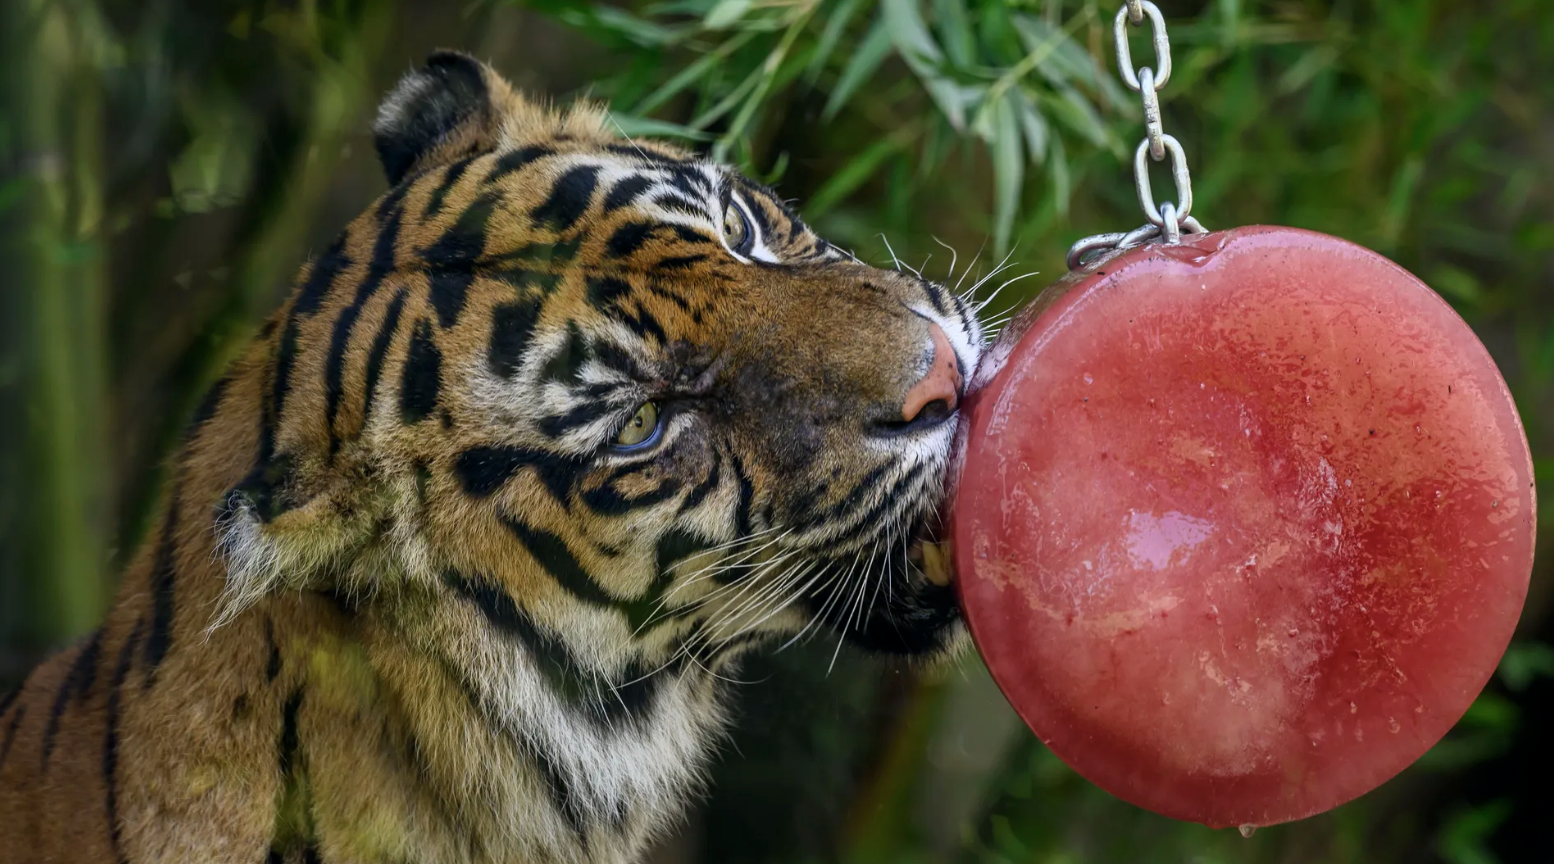 A Sumatran tiger cools off with a block of frozen fruit as temperatures hit 104°F at Rome Zoo in Italy on July 19. The Italian government has issued red alerts for 16 cities due to the searing, days-long heat wave. 